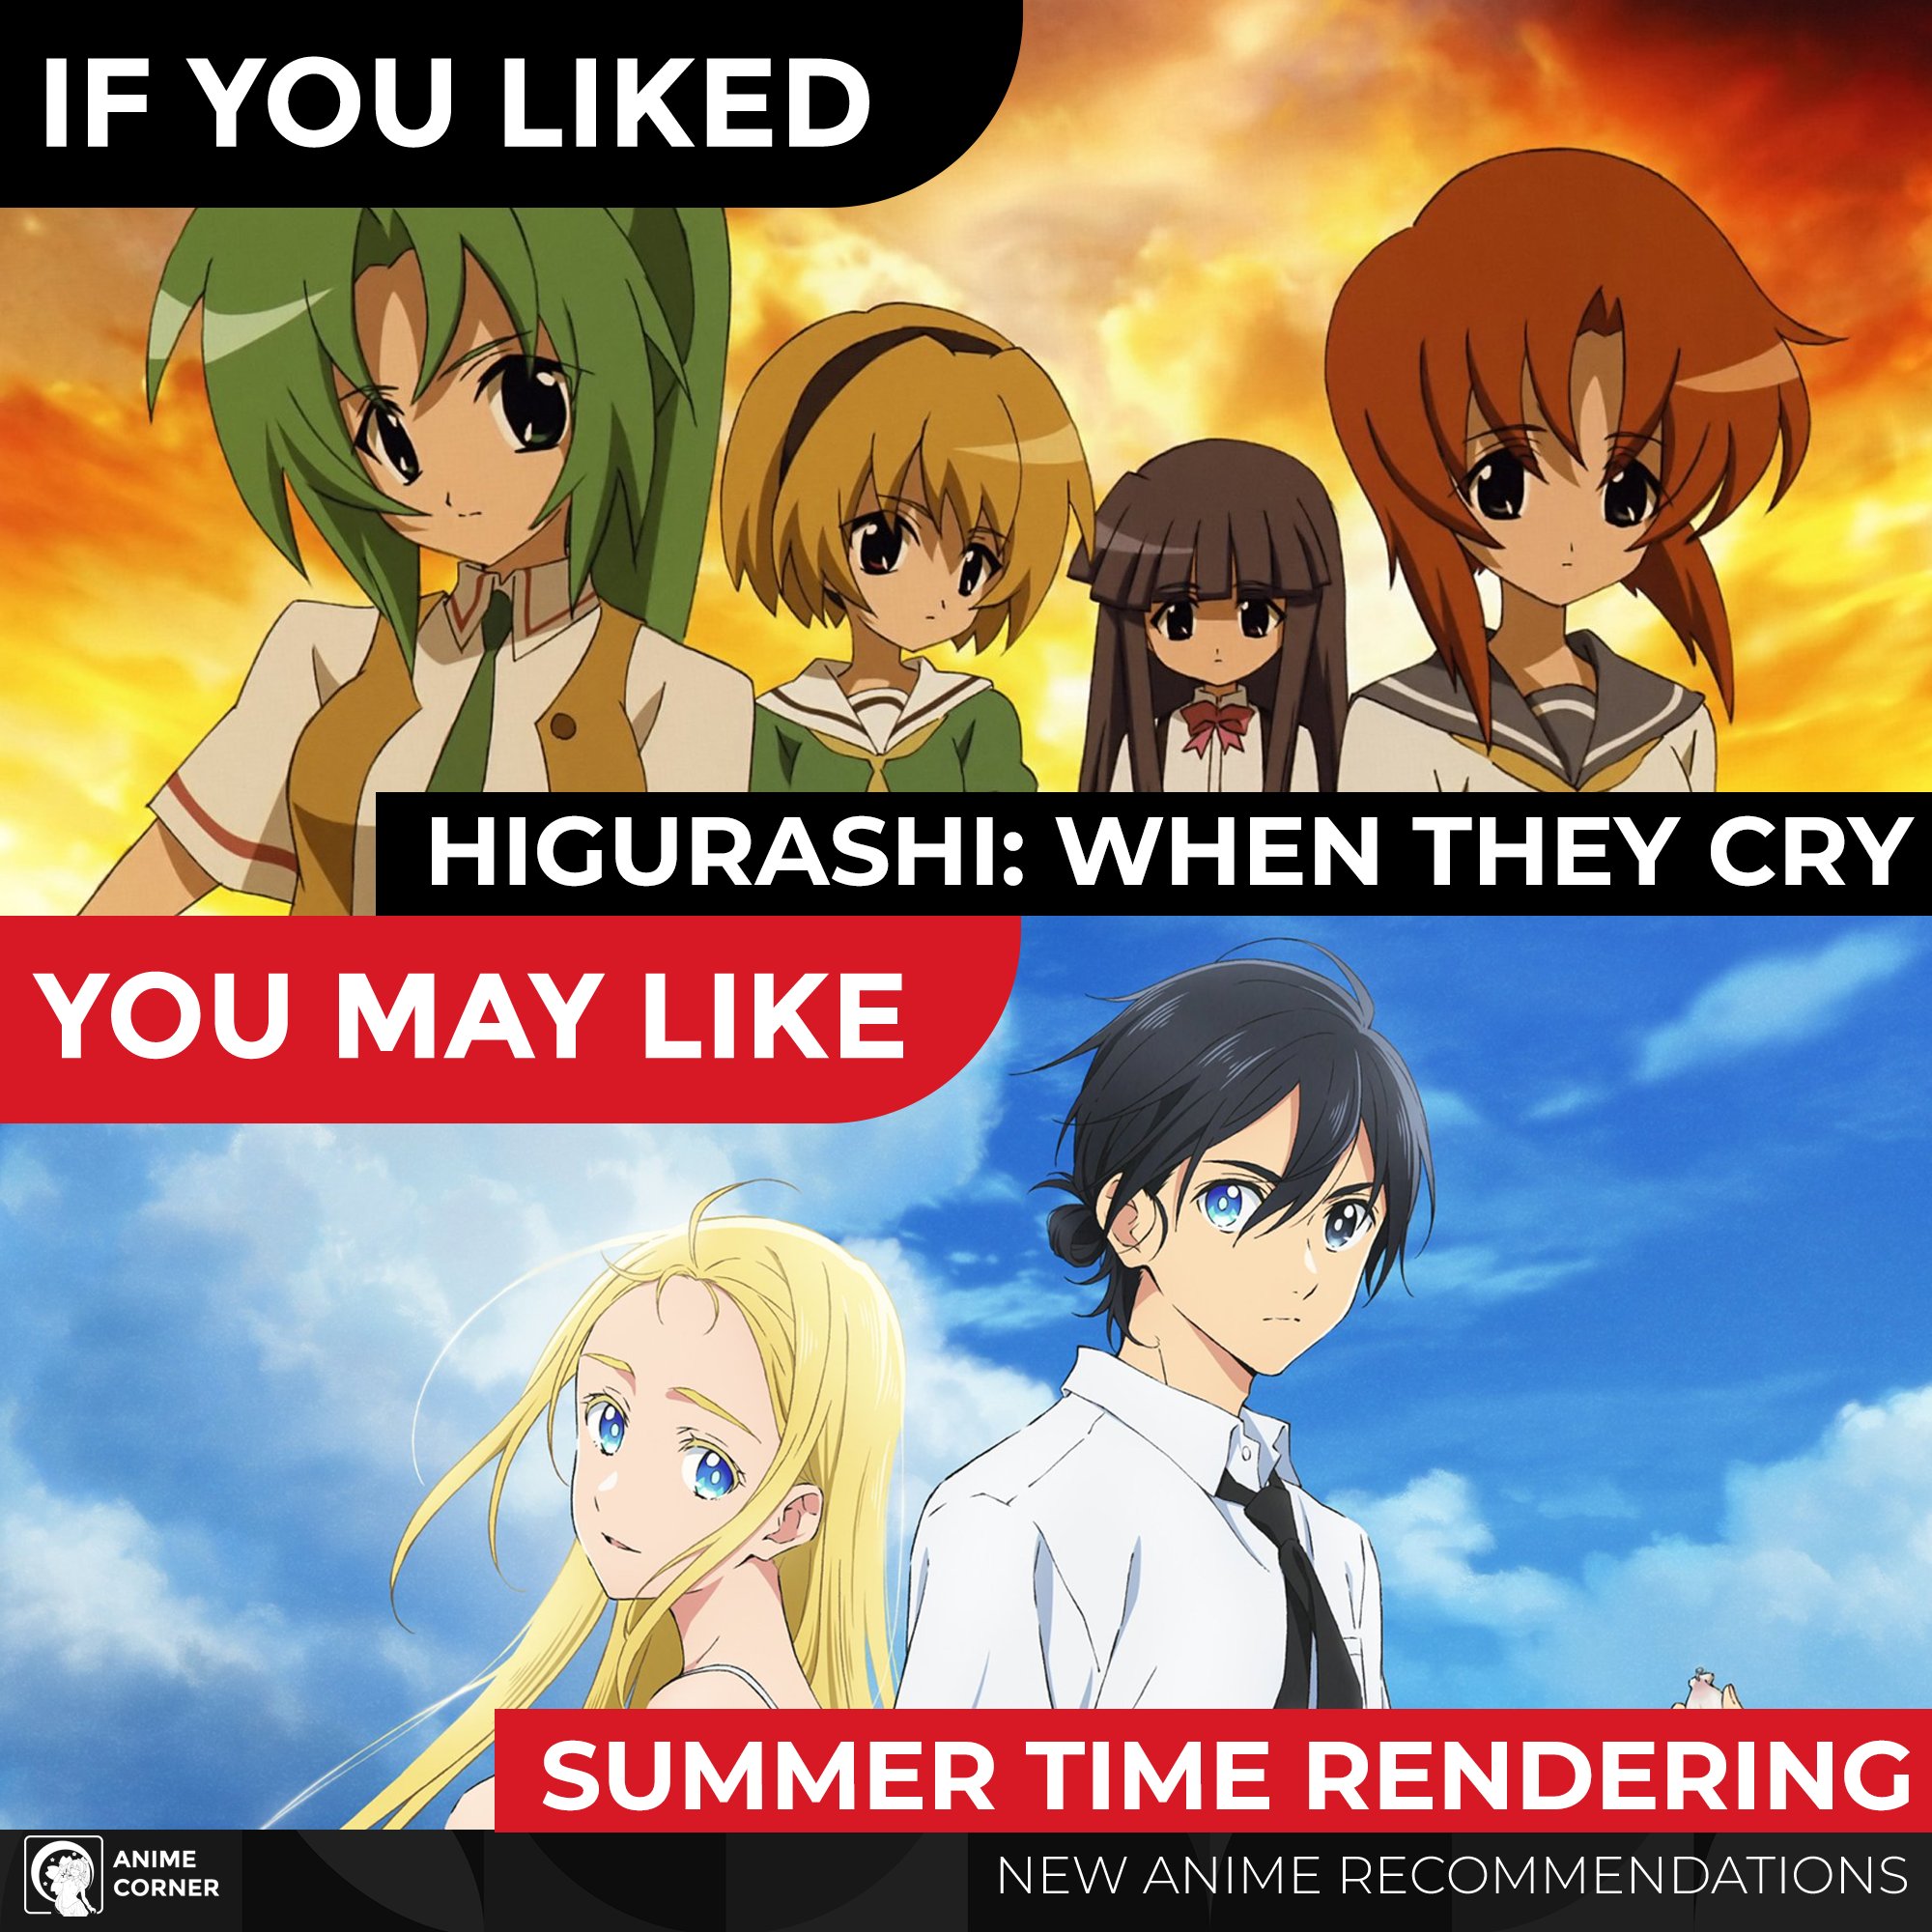 Summer Time Rendering special feature